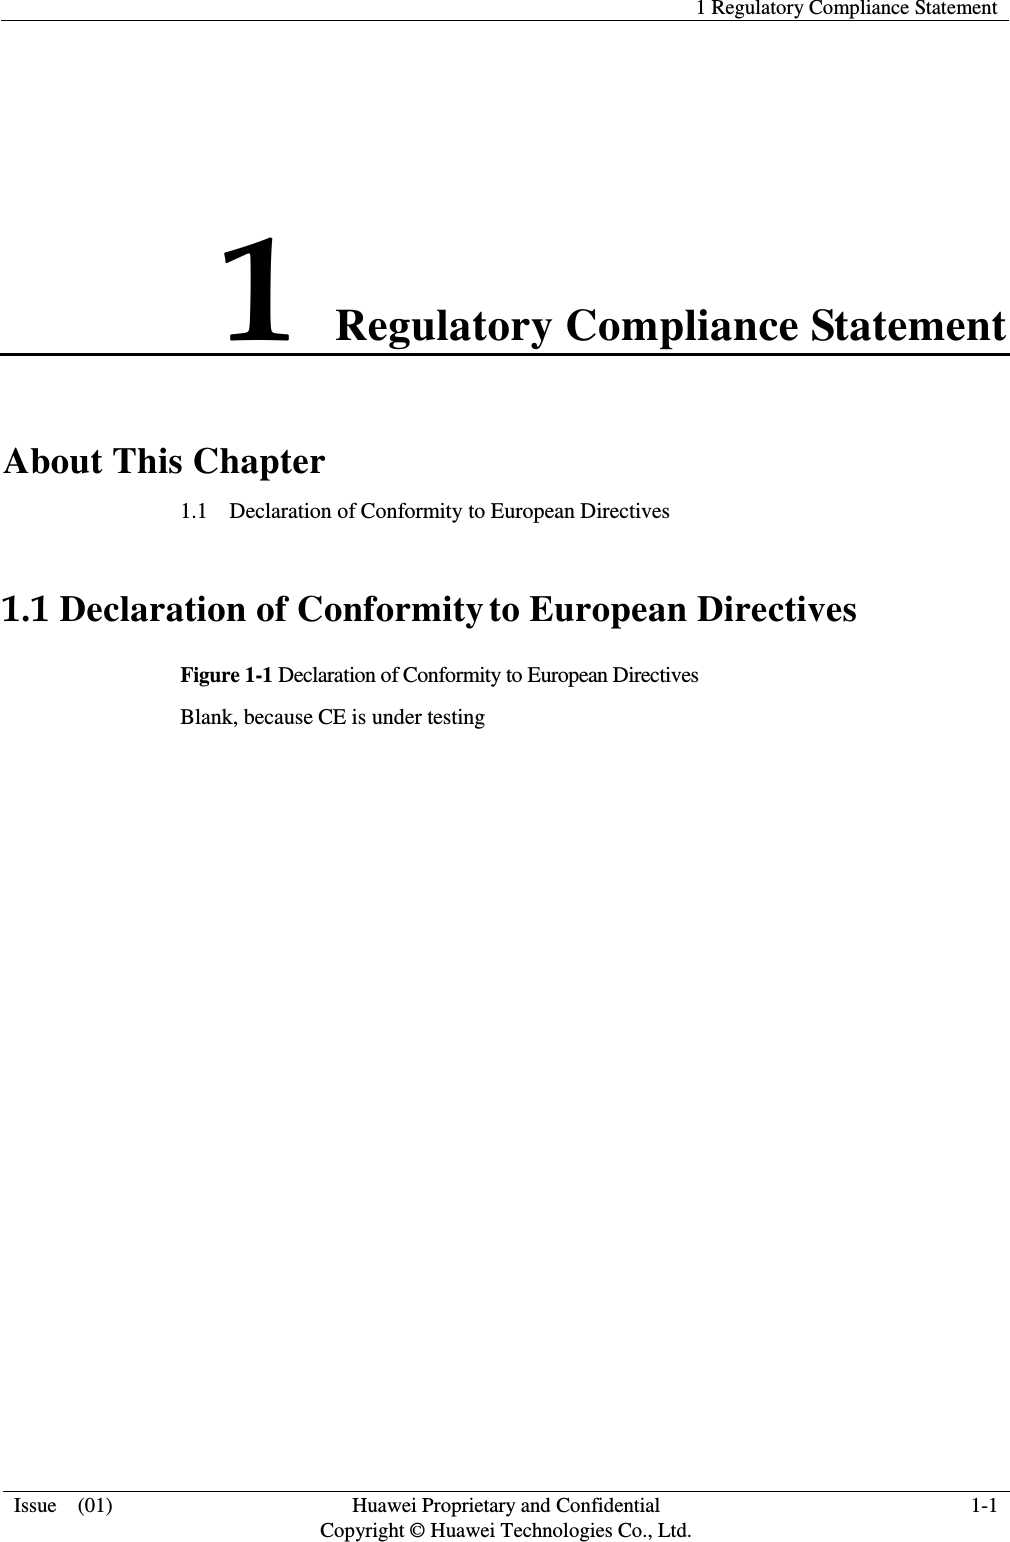   1 Regulatory Compliance Statement  Issue    (01) Huawei Proprietary and Confidential                                     Copyright © Huawei Technologies Co., Ltd. 1-1  1 Regulatory Compliance Statement About This Chapter 1.1    Declaration of Conformity to European Directives 1.1 Declaration of Conformity to European Directives Figure 1-1 Declaration of Conformity to European Directives   Blank, because CE is under testing 